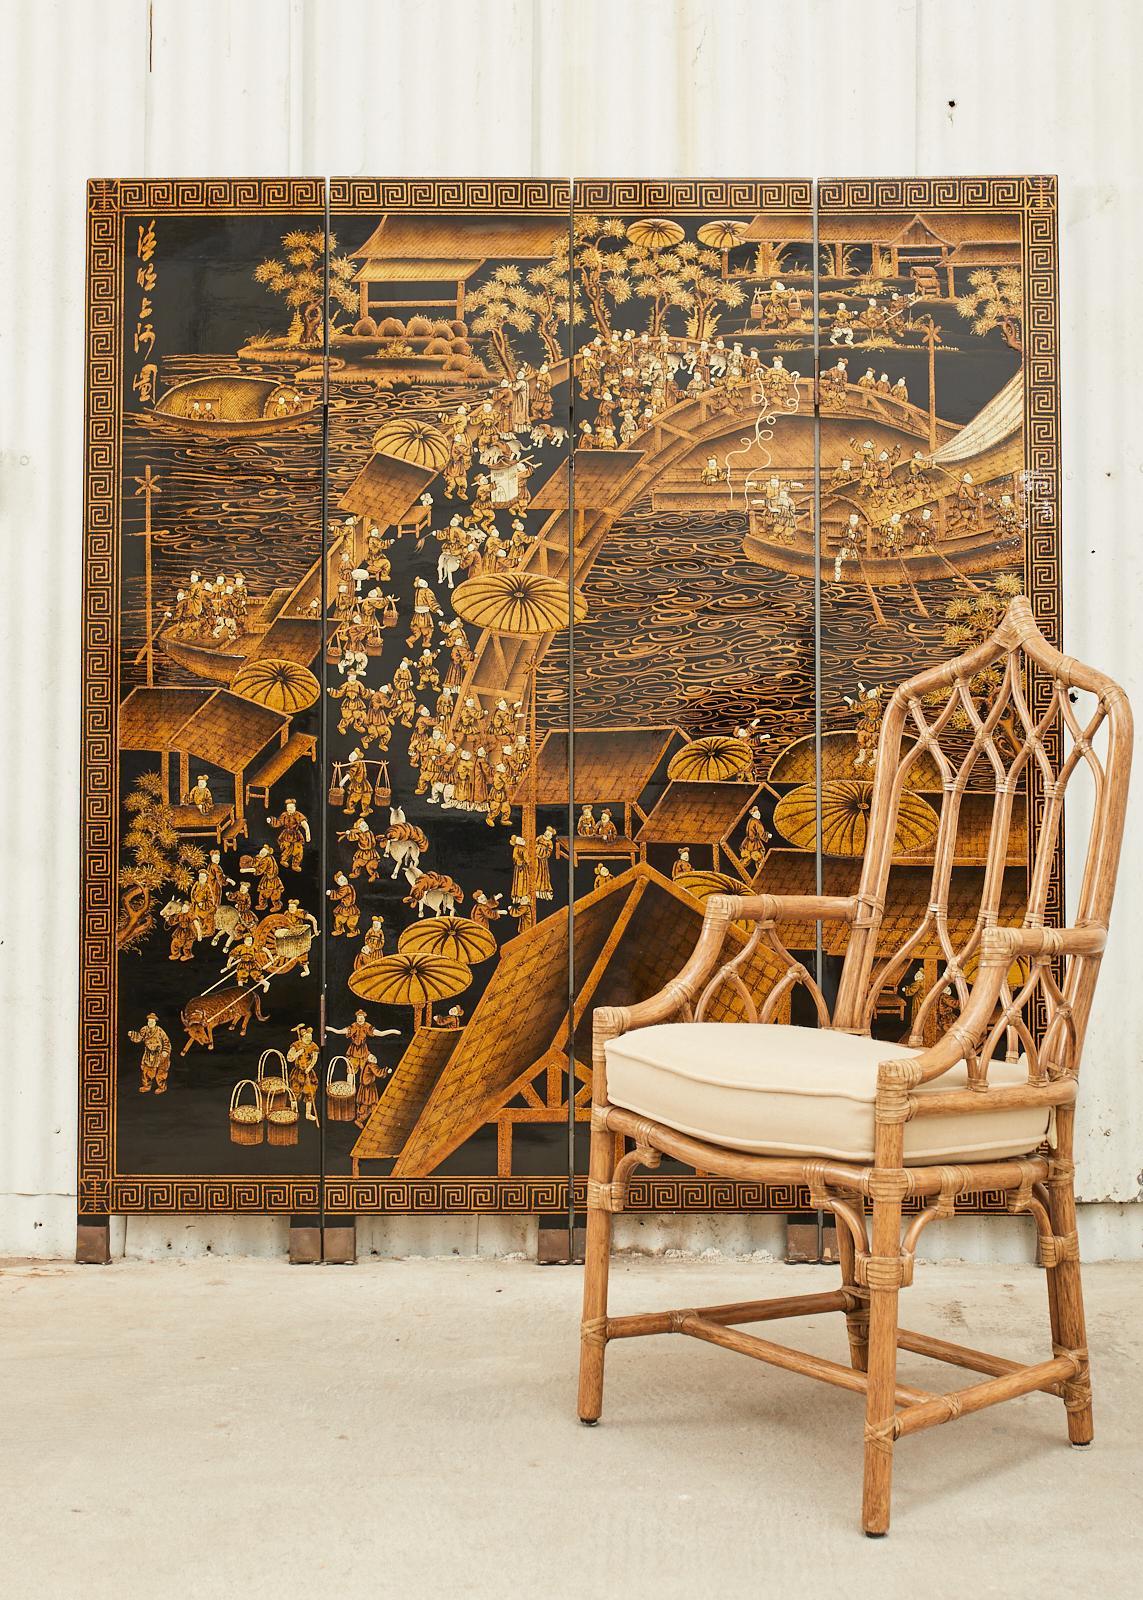 Fantastic Chinese export four-panel coromandel screen depicting the Qingming festival with a river bridge landscape. Beautifully crafted in gilt with a moriage (raised pigment) style. The panels measure 16 inches each and are conjoined with